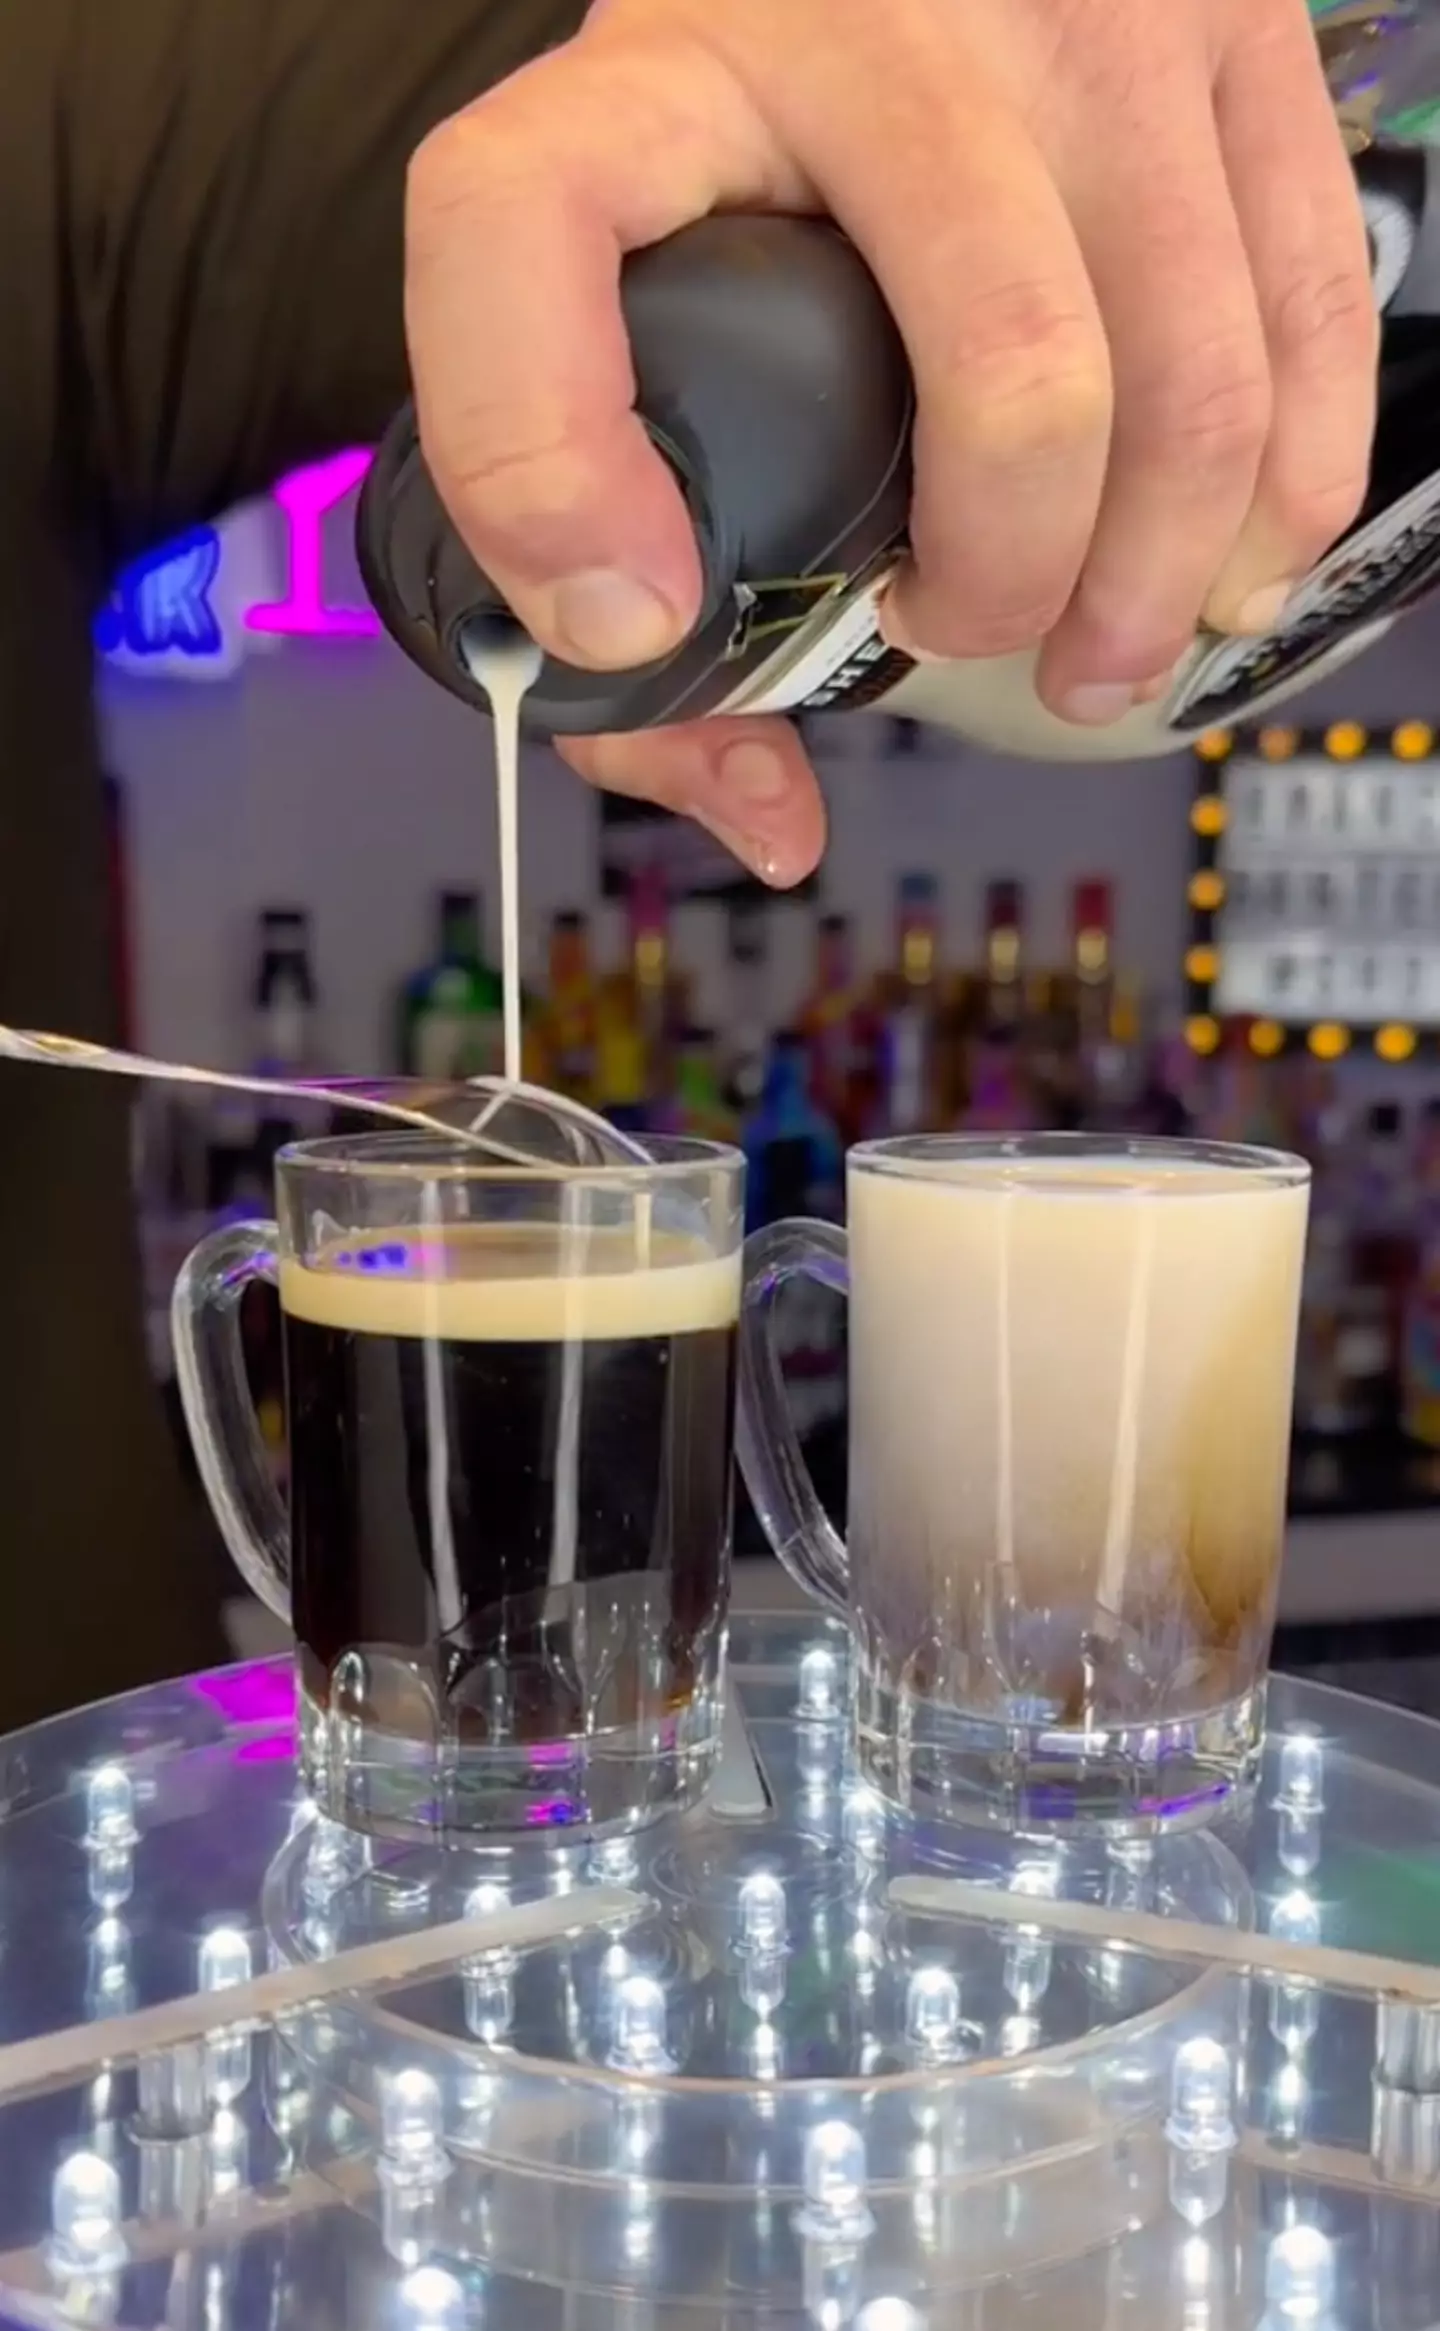 Brits are dying to get their hands on the ‘Baby Guinness in a bottle’.